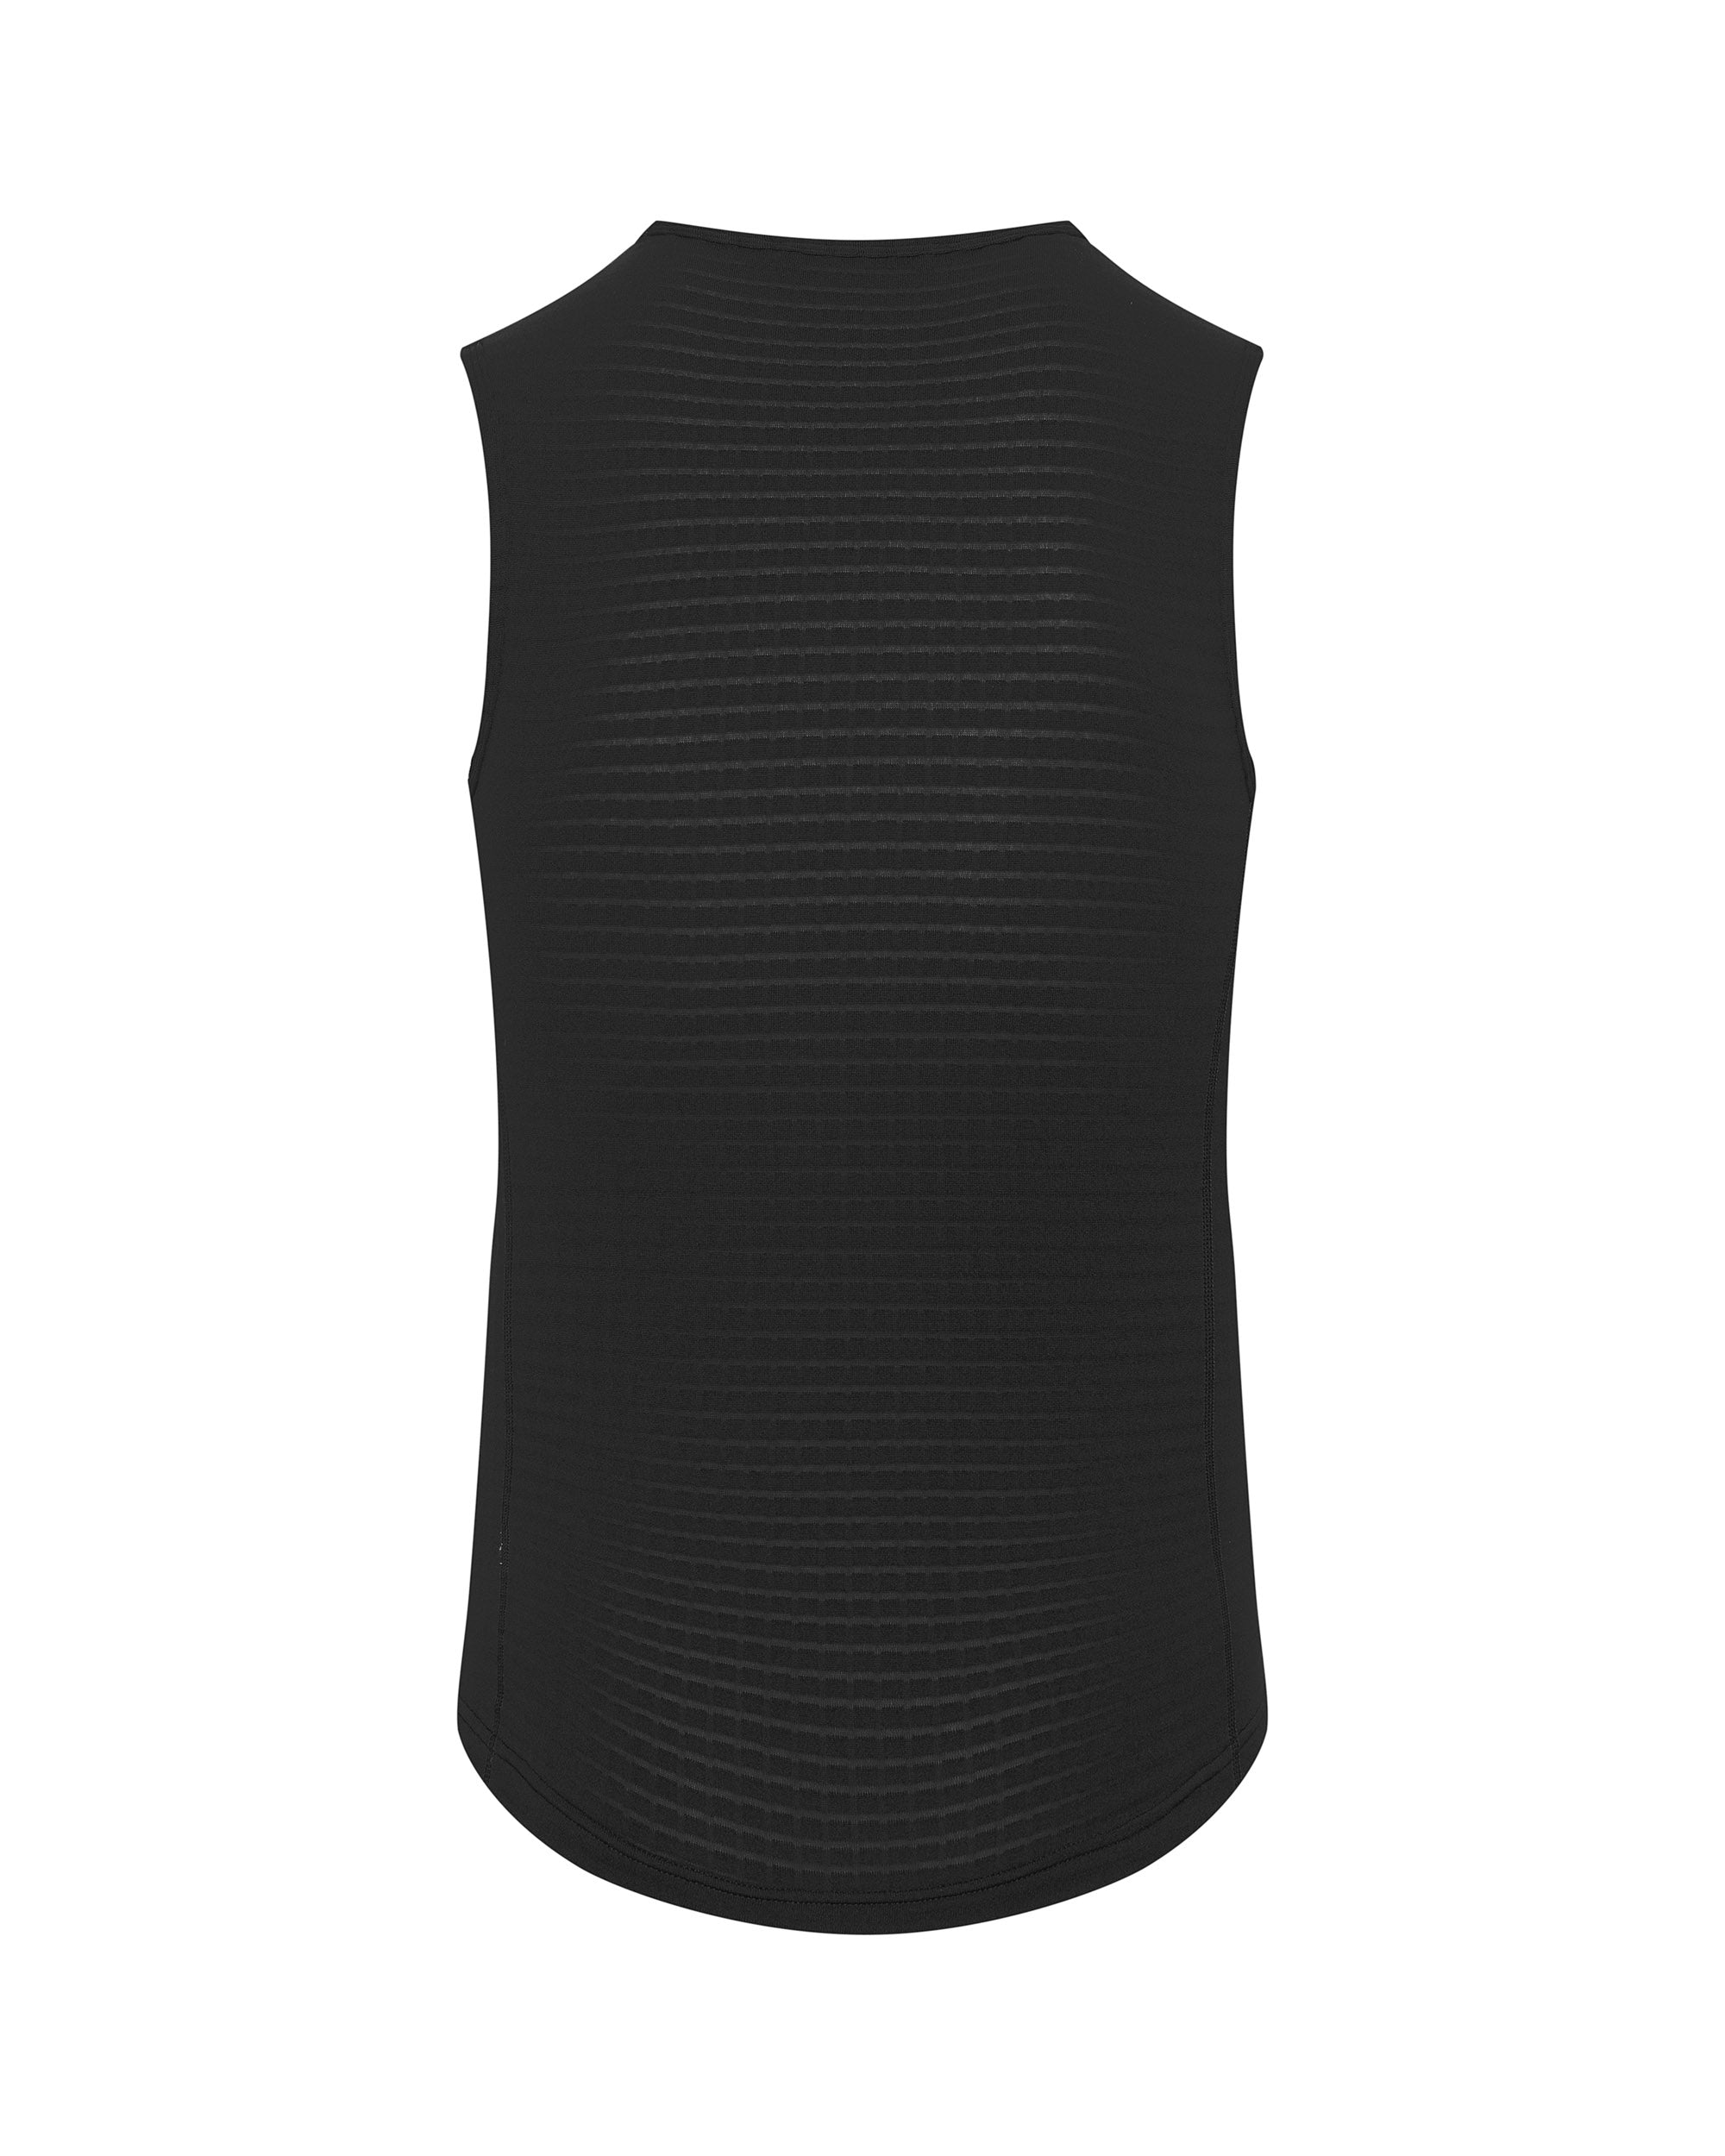 Coline Air Channel Sleeveless Base Layer